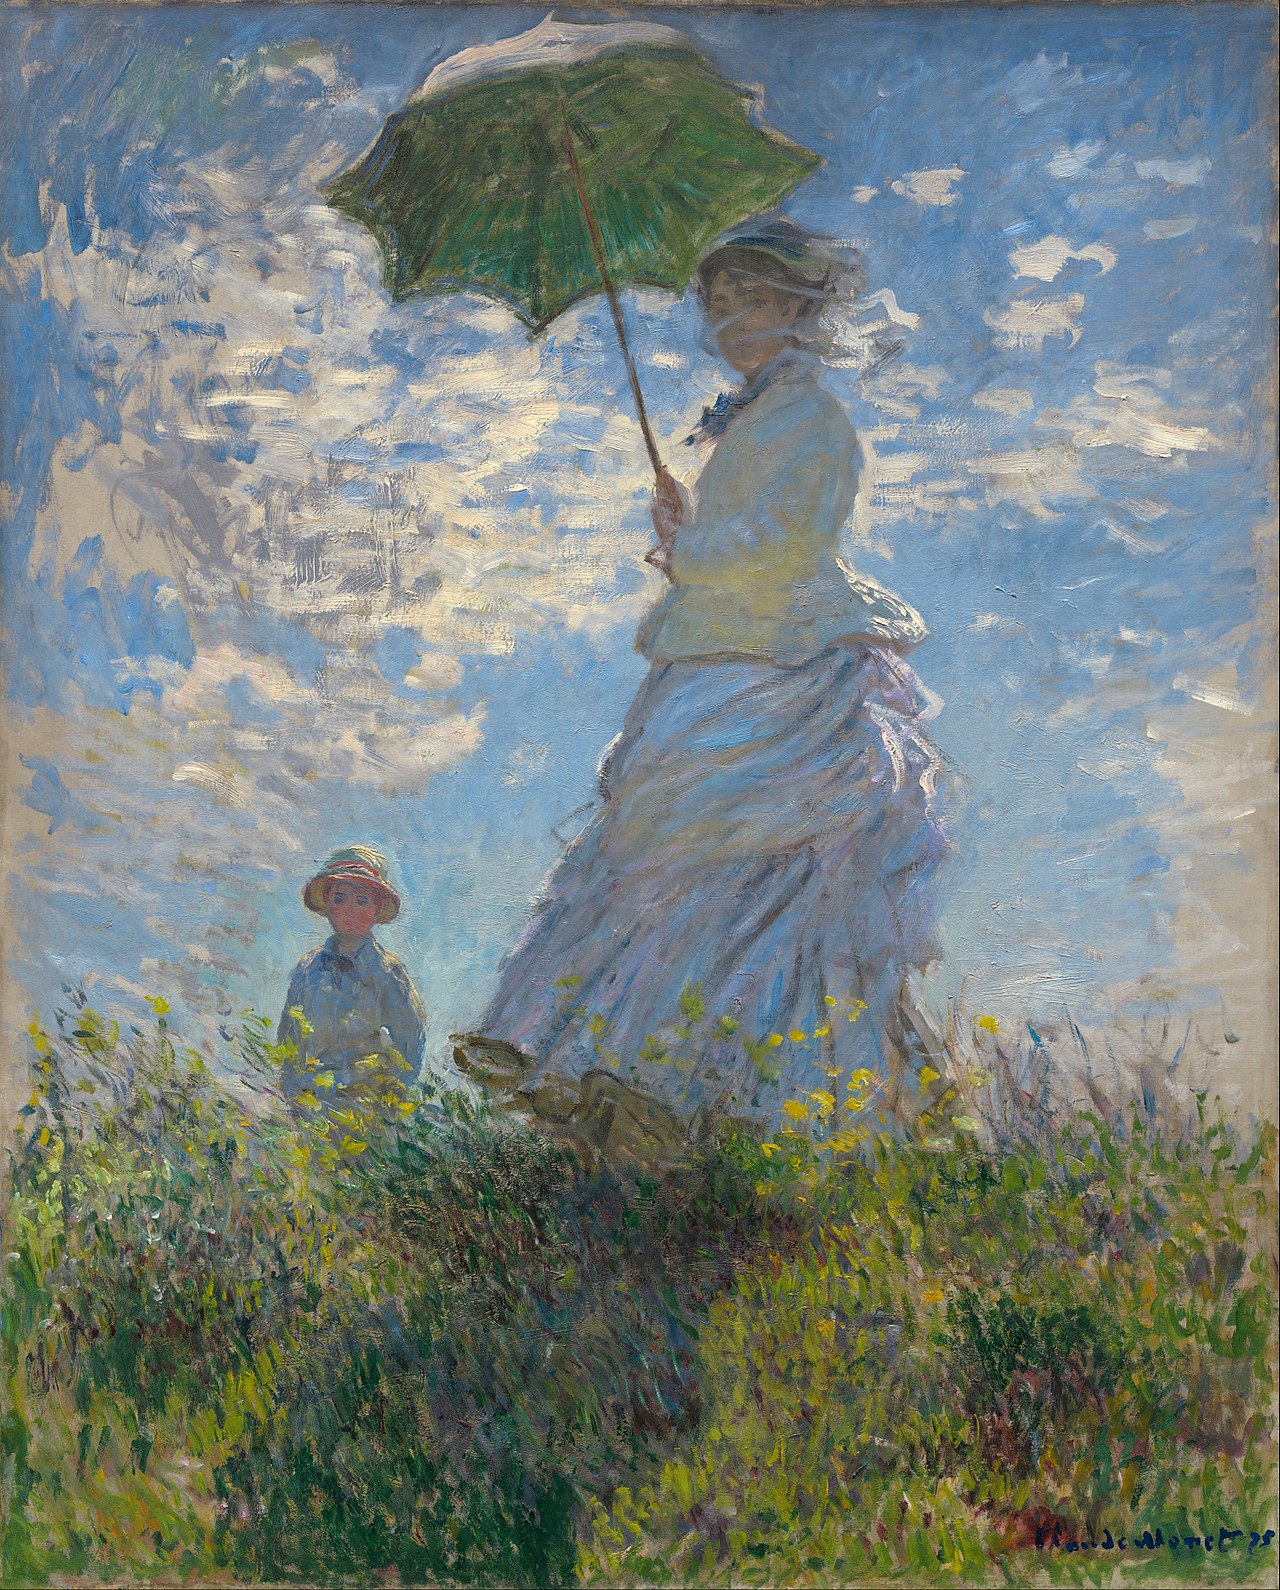 Woman with a Parasol - Madame Monet and her Son [Claude Monet, 1875].jpg